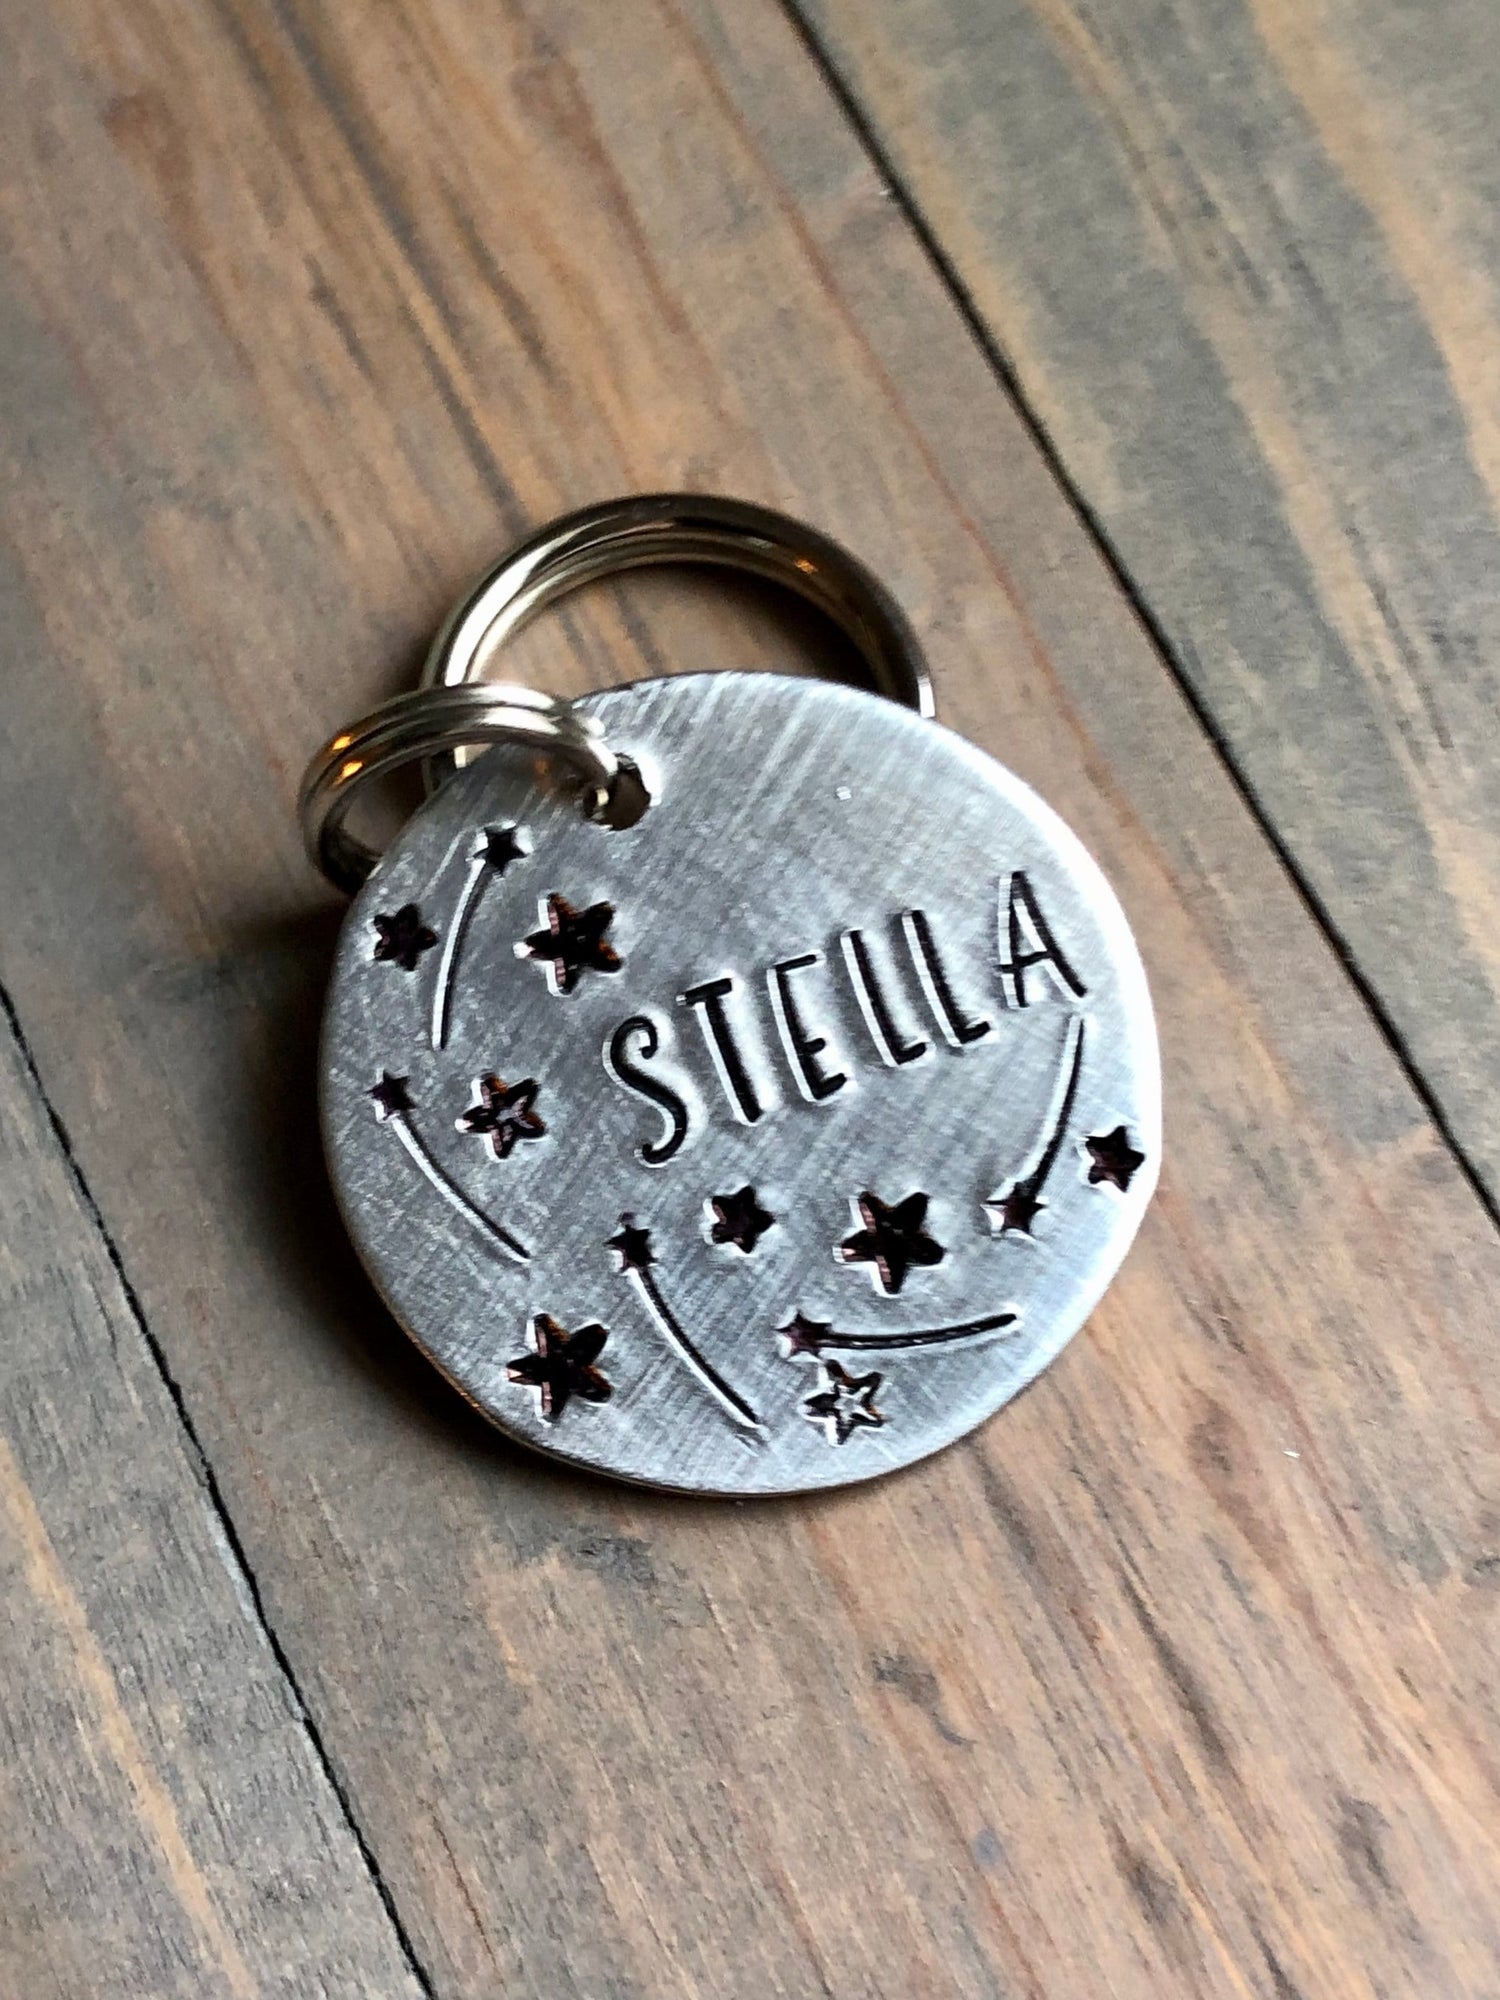 Dog Tag with Stars, Stella, Pet Id Tag with Night Sky, Dog Tag with Shooting Stars, Milky Way Pet Tag for Collar